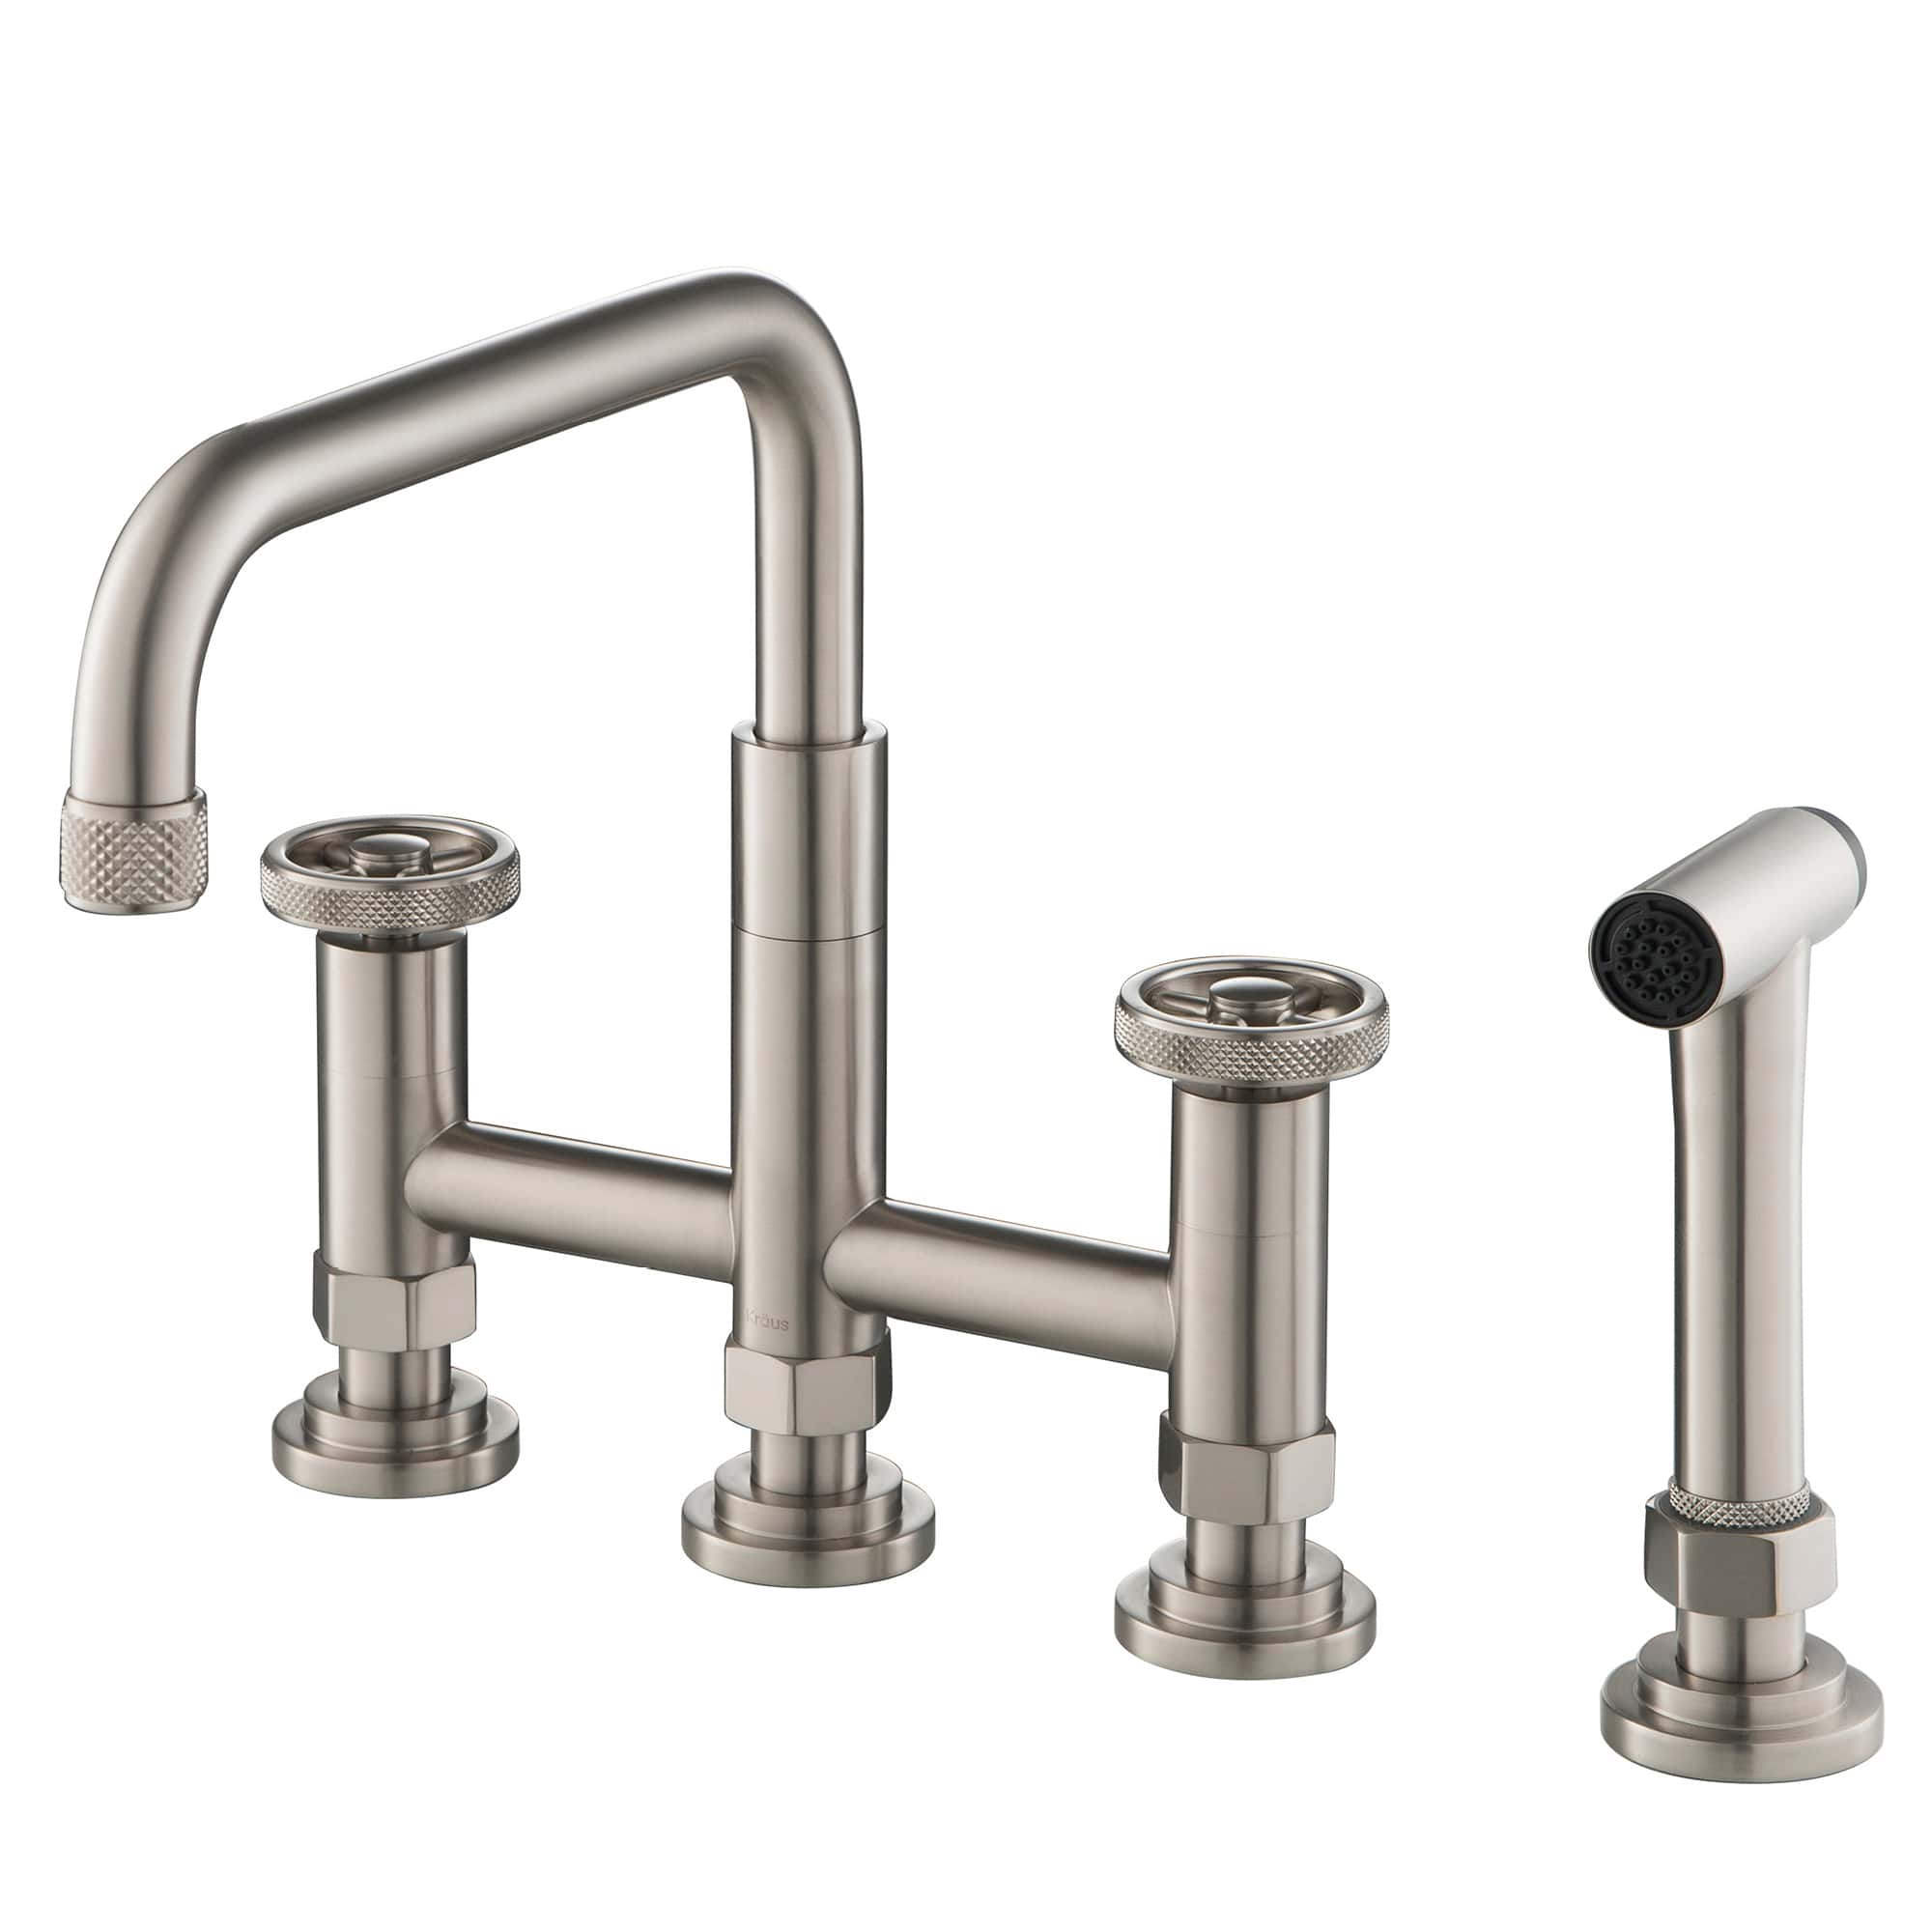 KRAUS KPF-3125 URBIX 12 3/8 INCH COLOR-CHANGING INDUSTRIAL BRIDGE KITCHEN FAUCET WITH SIDE SPRAYER AND COLOR SMART TECHNOLOGY